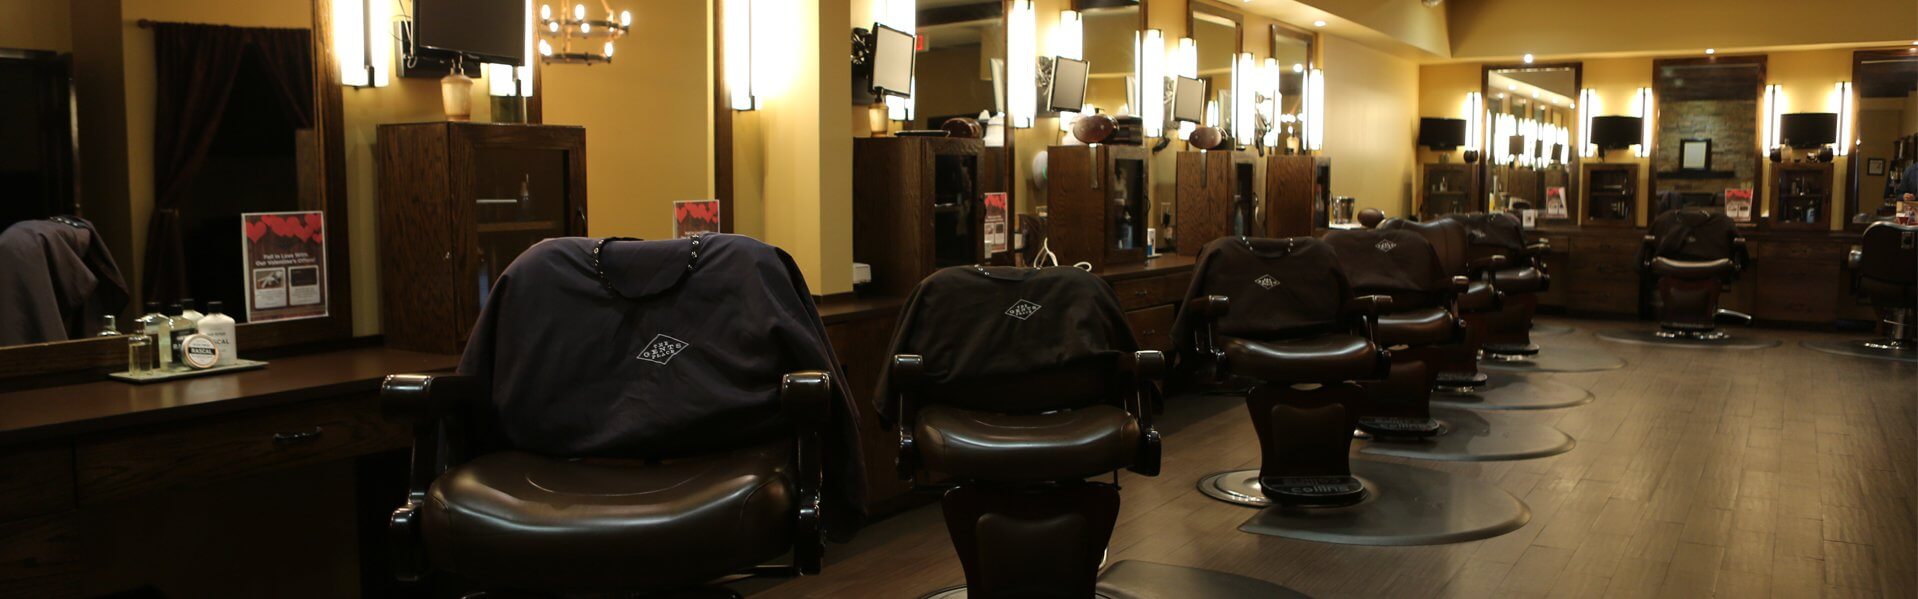 Page Banner - The Gents Place Mens Haircuts Near Me and Barber Shop Houston TX - River Oaks